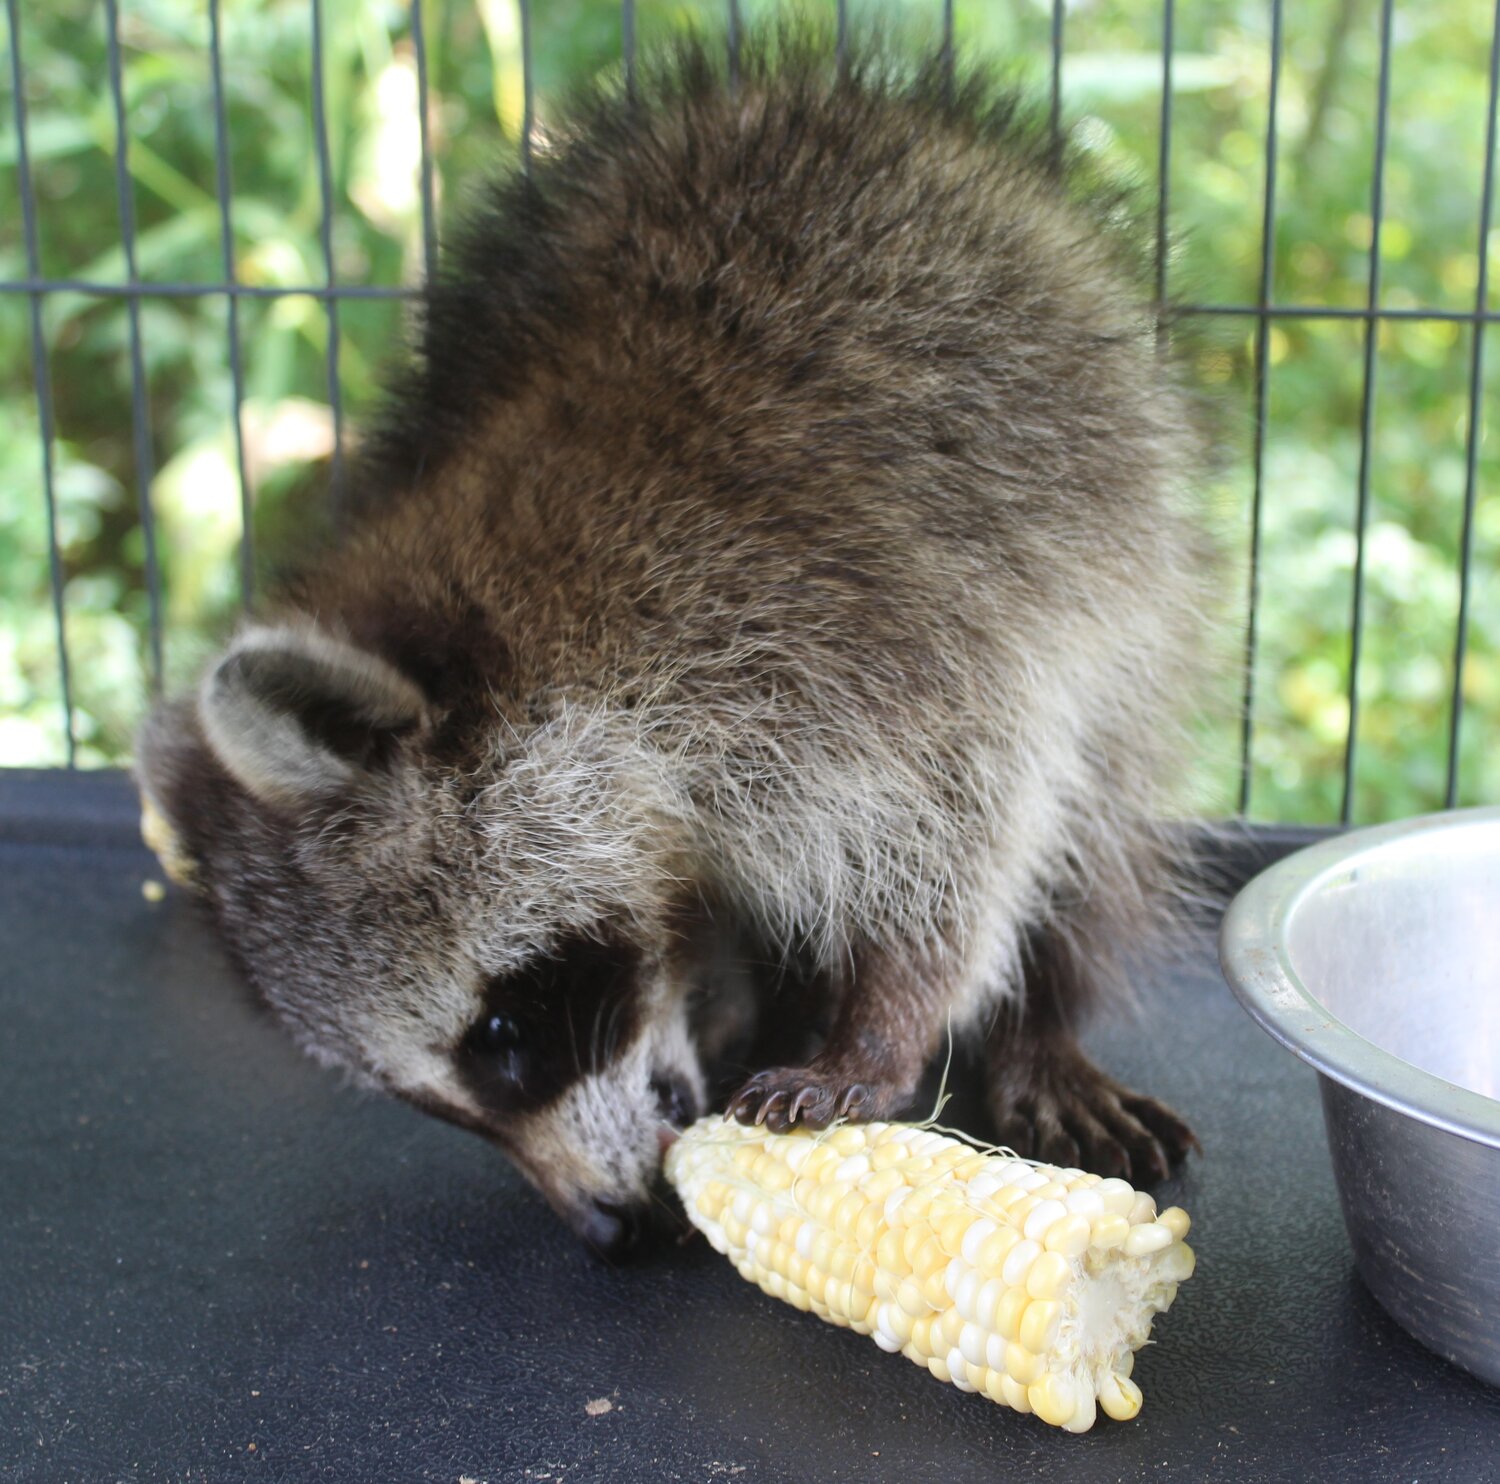 How to Keep Raccoons out of Corn Pile